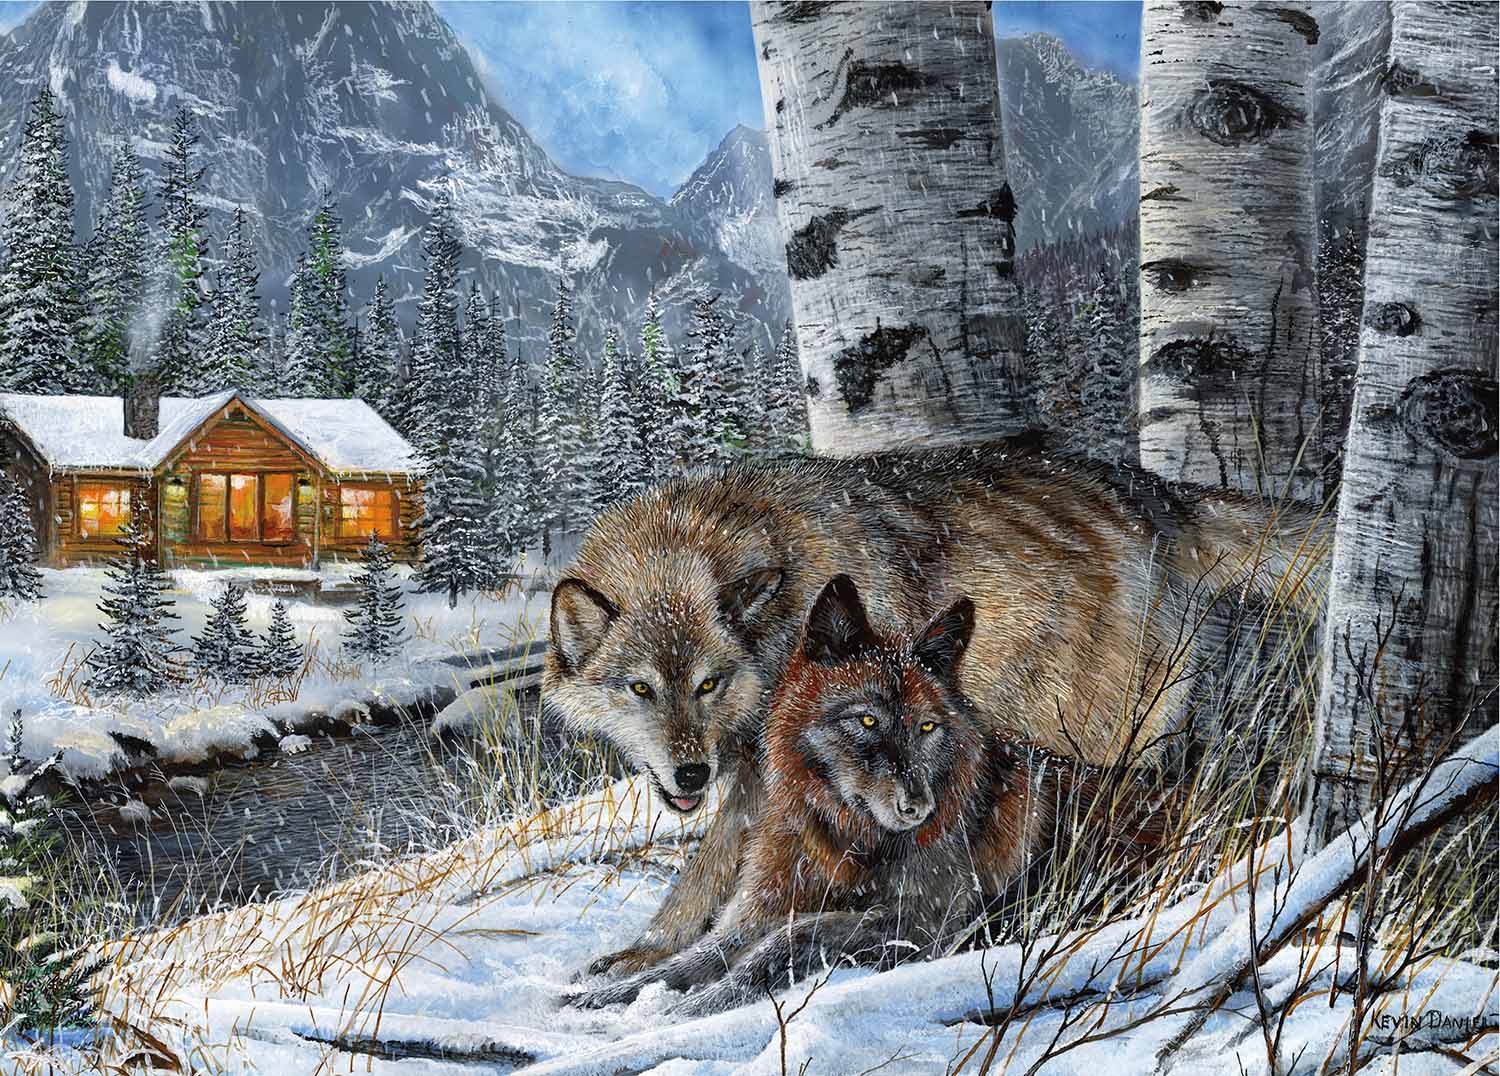 Wolf Pack Wolf Jigsaw Puzzle By SunsOut